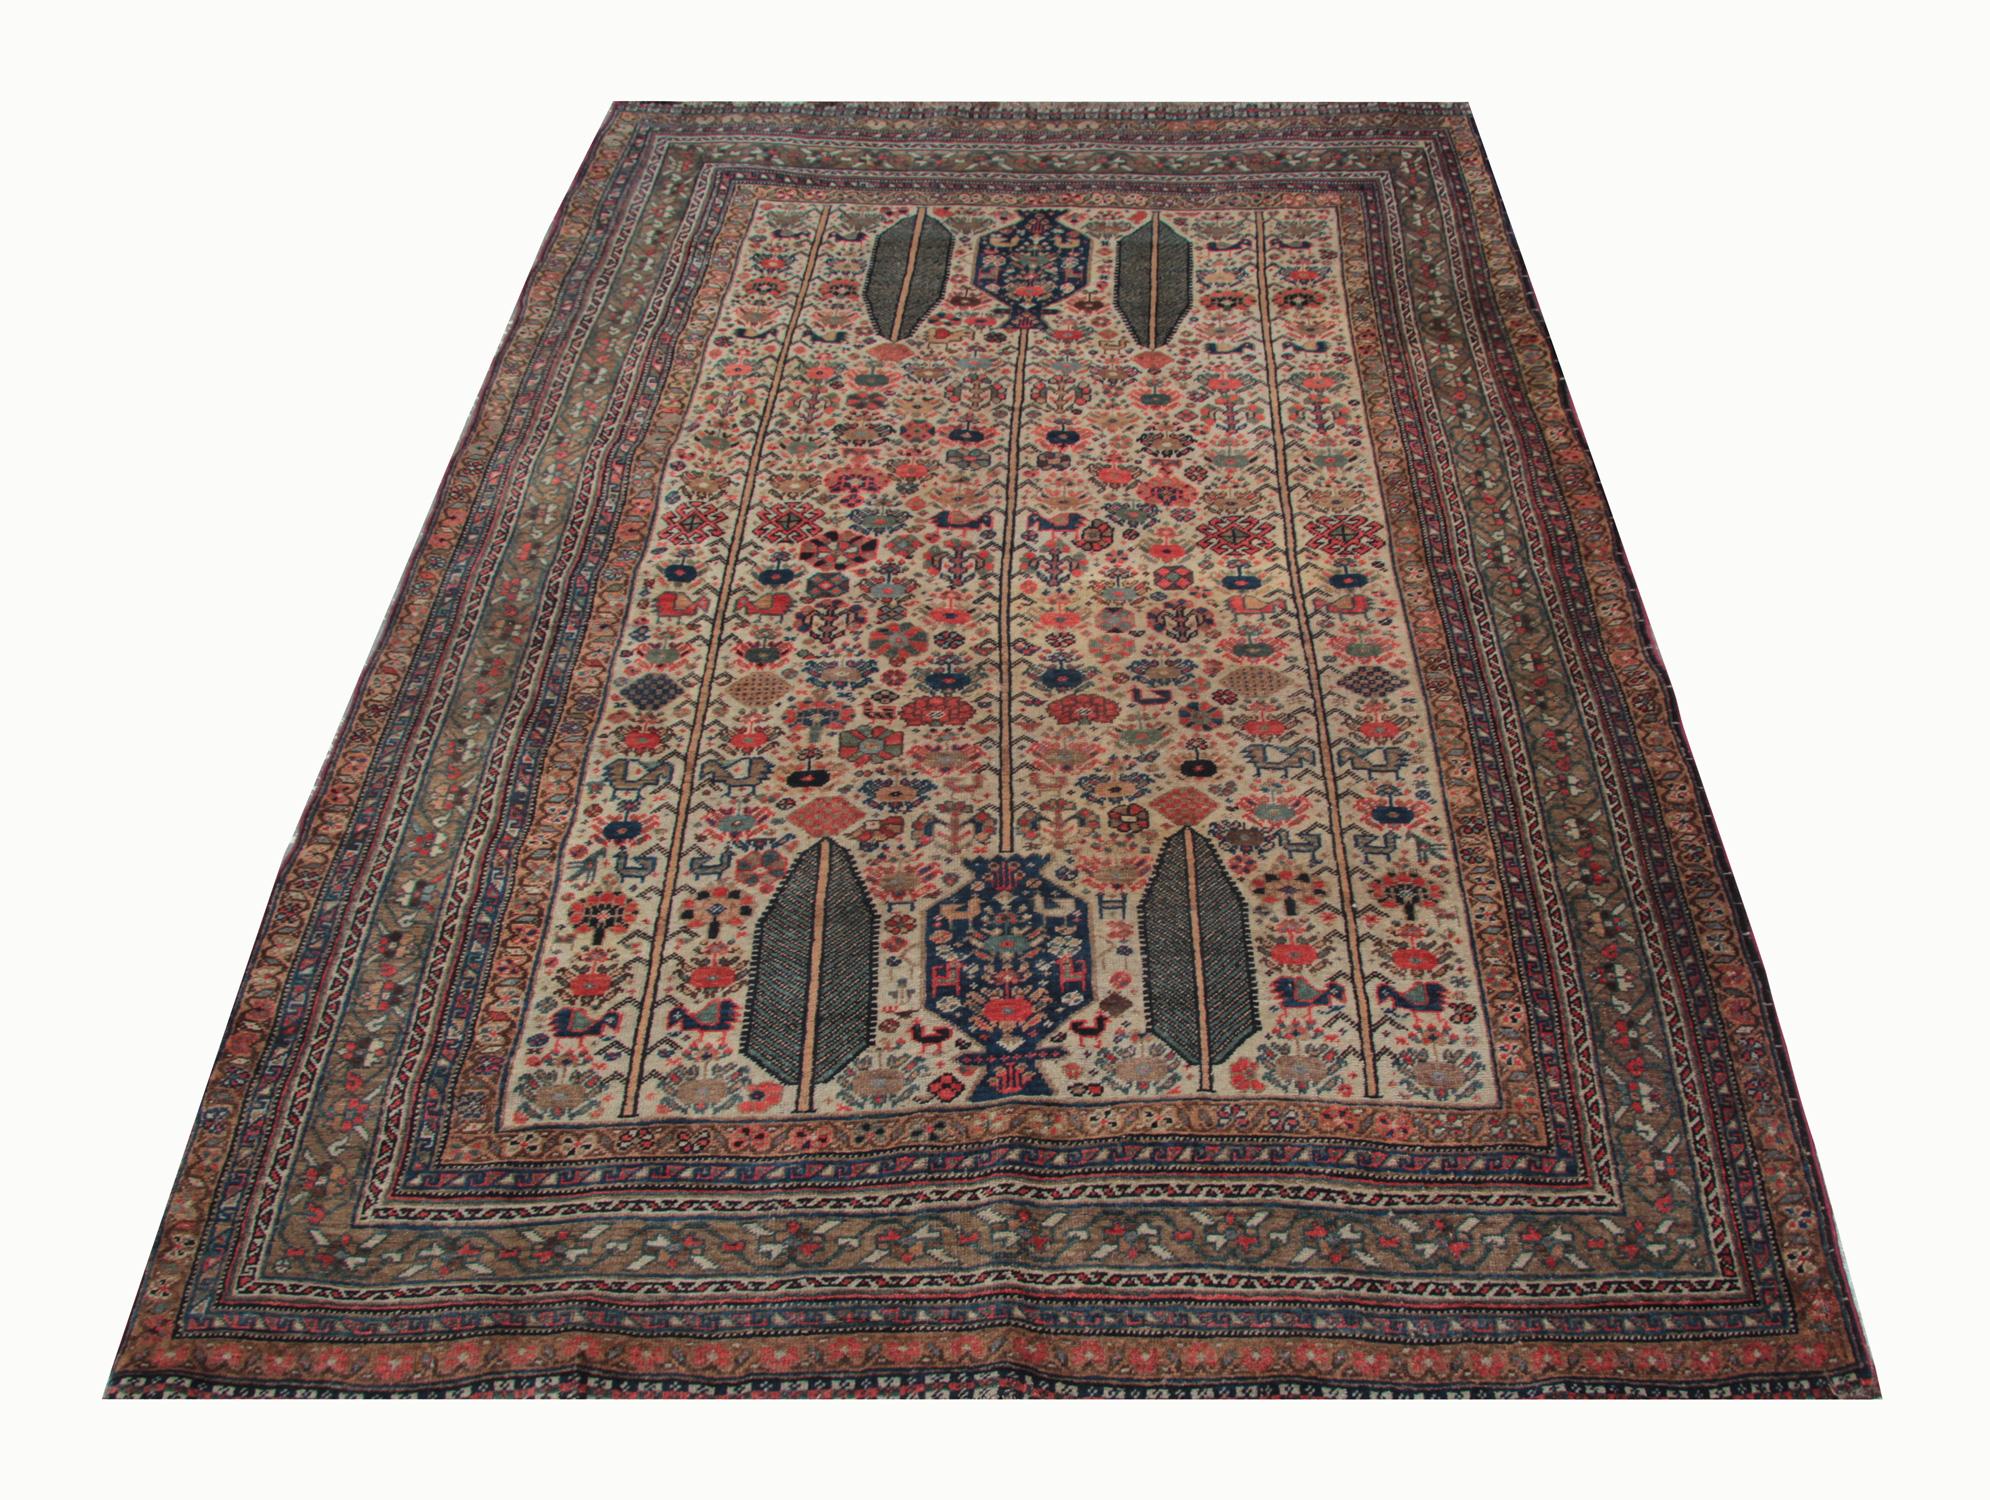 This beautiful antique wool area rug features a bold floral design woven symmetrically with tribal motifs throughout. Featuring a cream background with brown, pink, blue, and beige accents that make up the design. Both the colour palette and